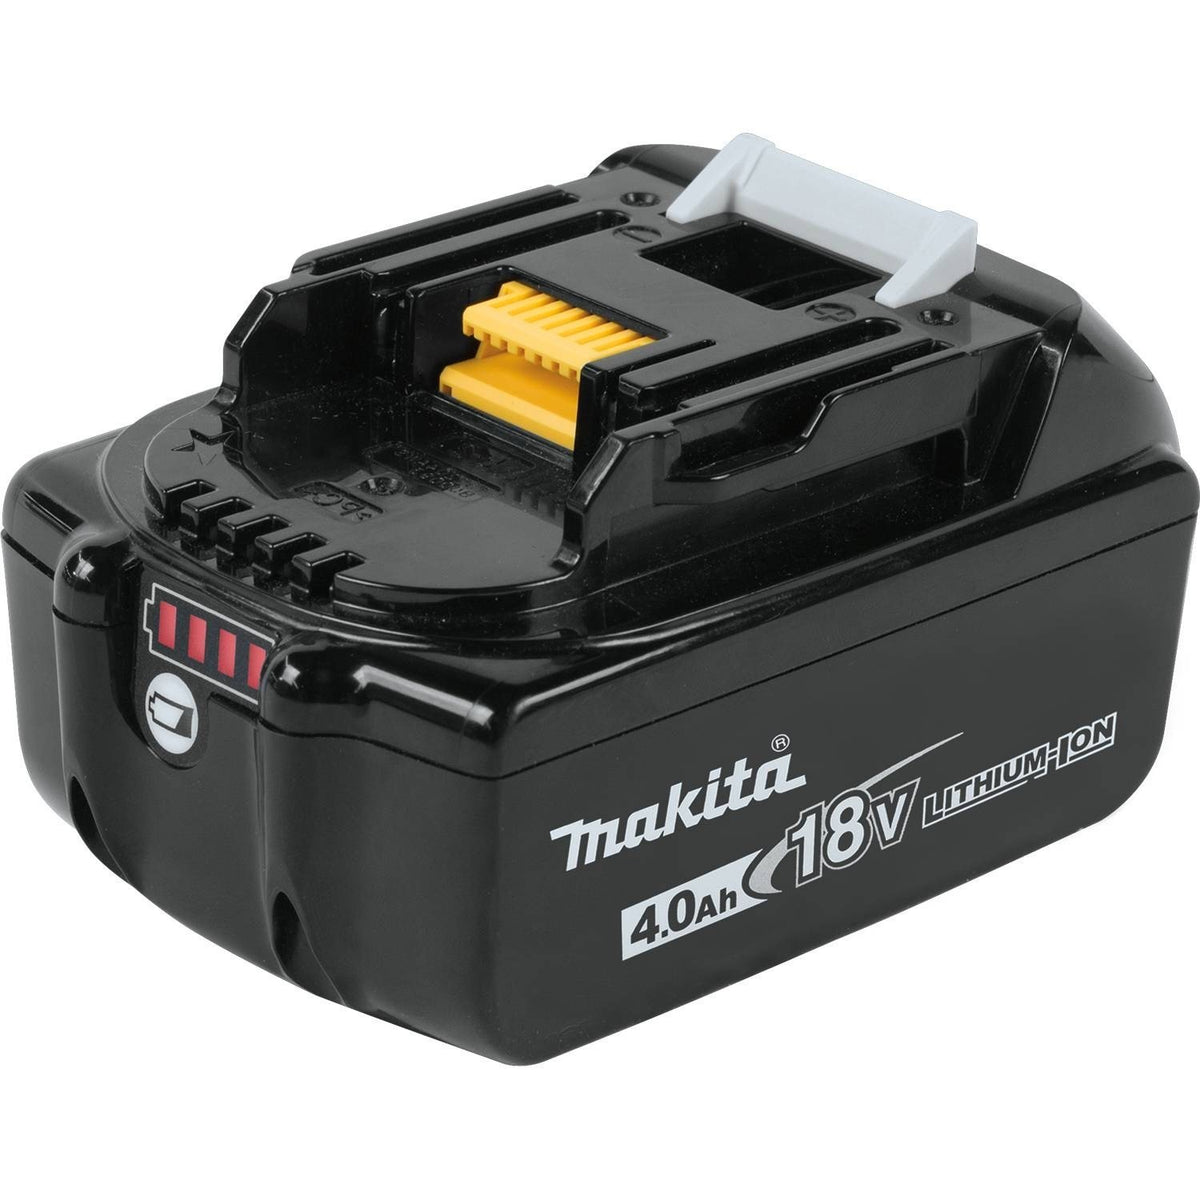 buy battery chargers at cheap rate in bulk. wholesale & retail construction hand tools store. home décor ideas, maintenance, repair replacement parts